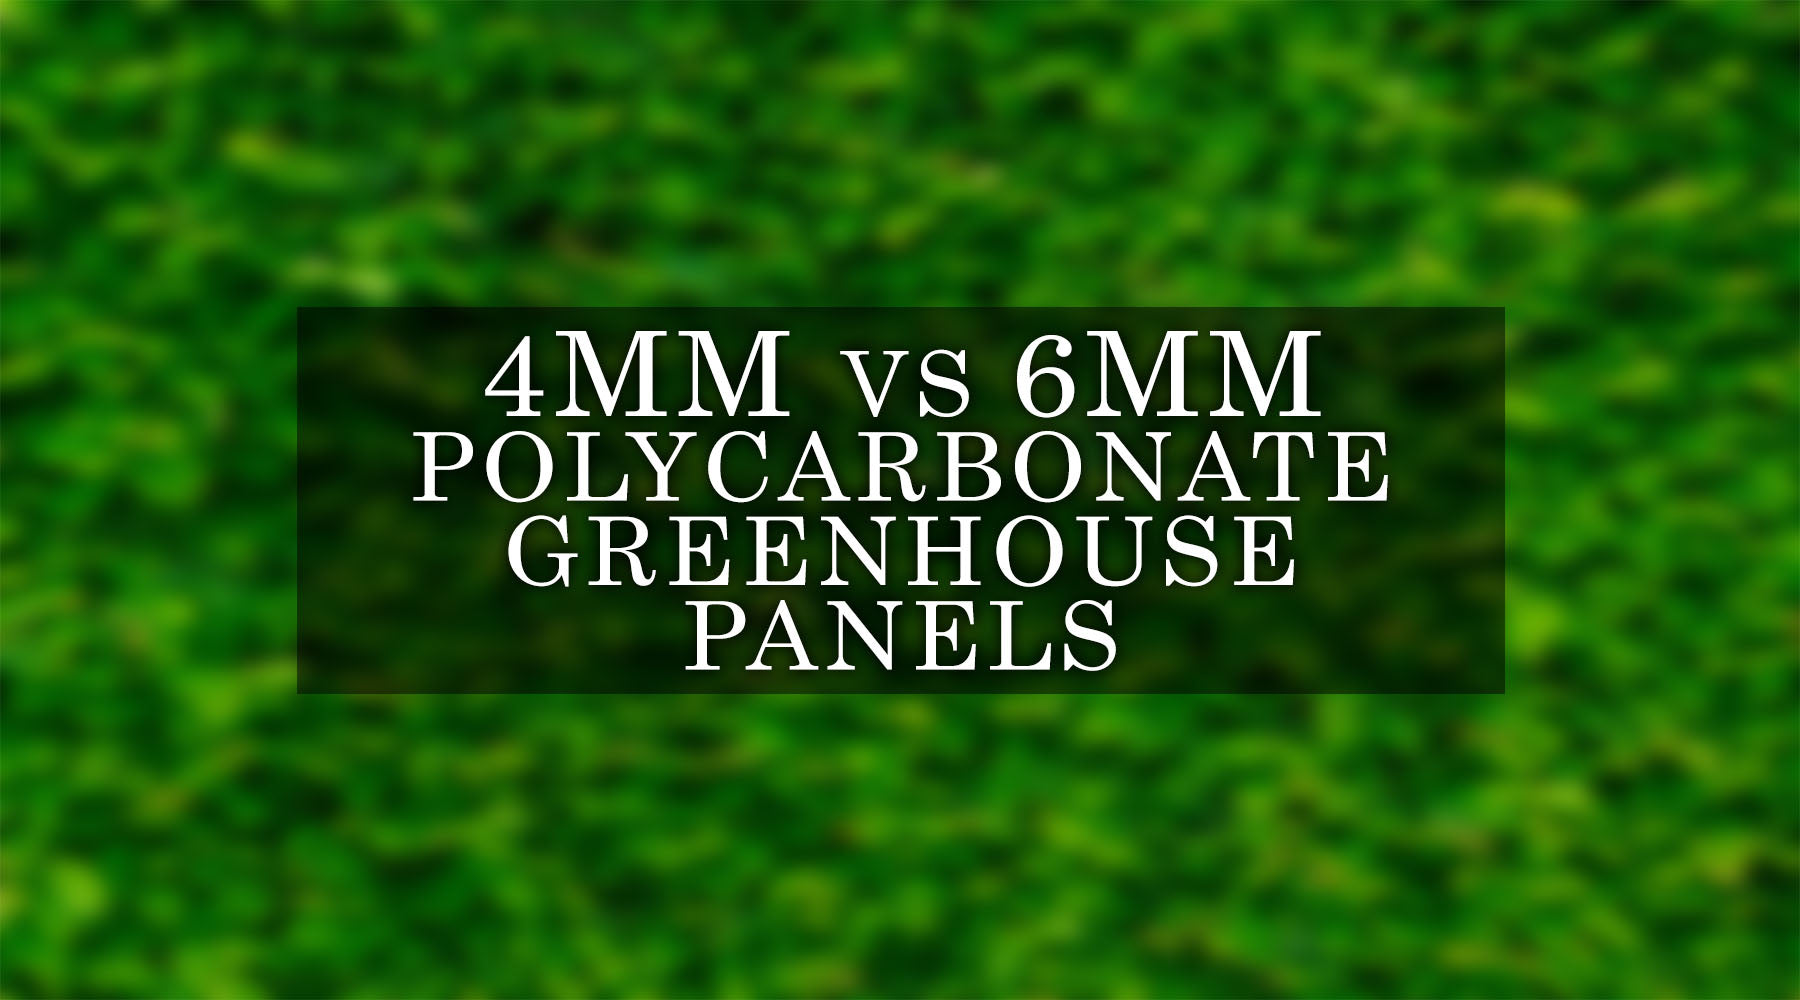 4mm vs 6mm Polycarbonate Greenhouse Panels: Which is Better?